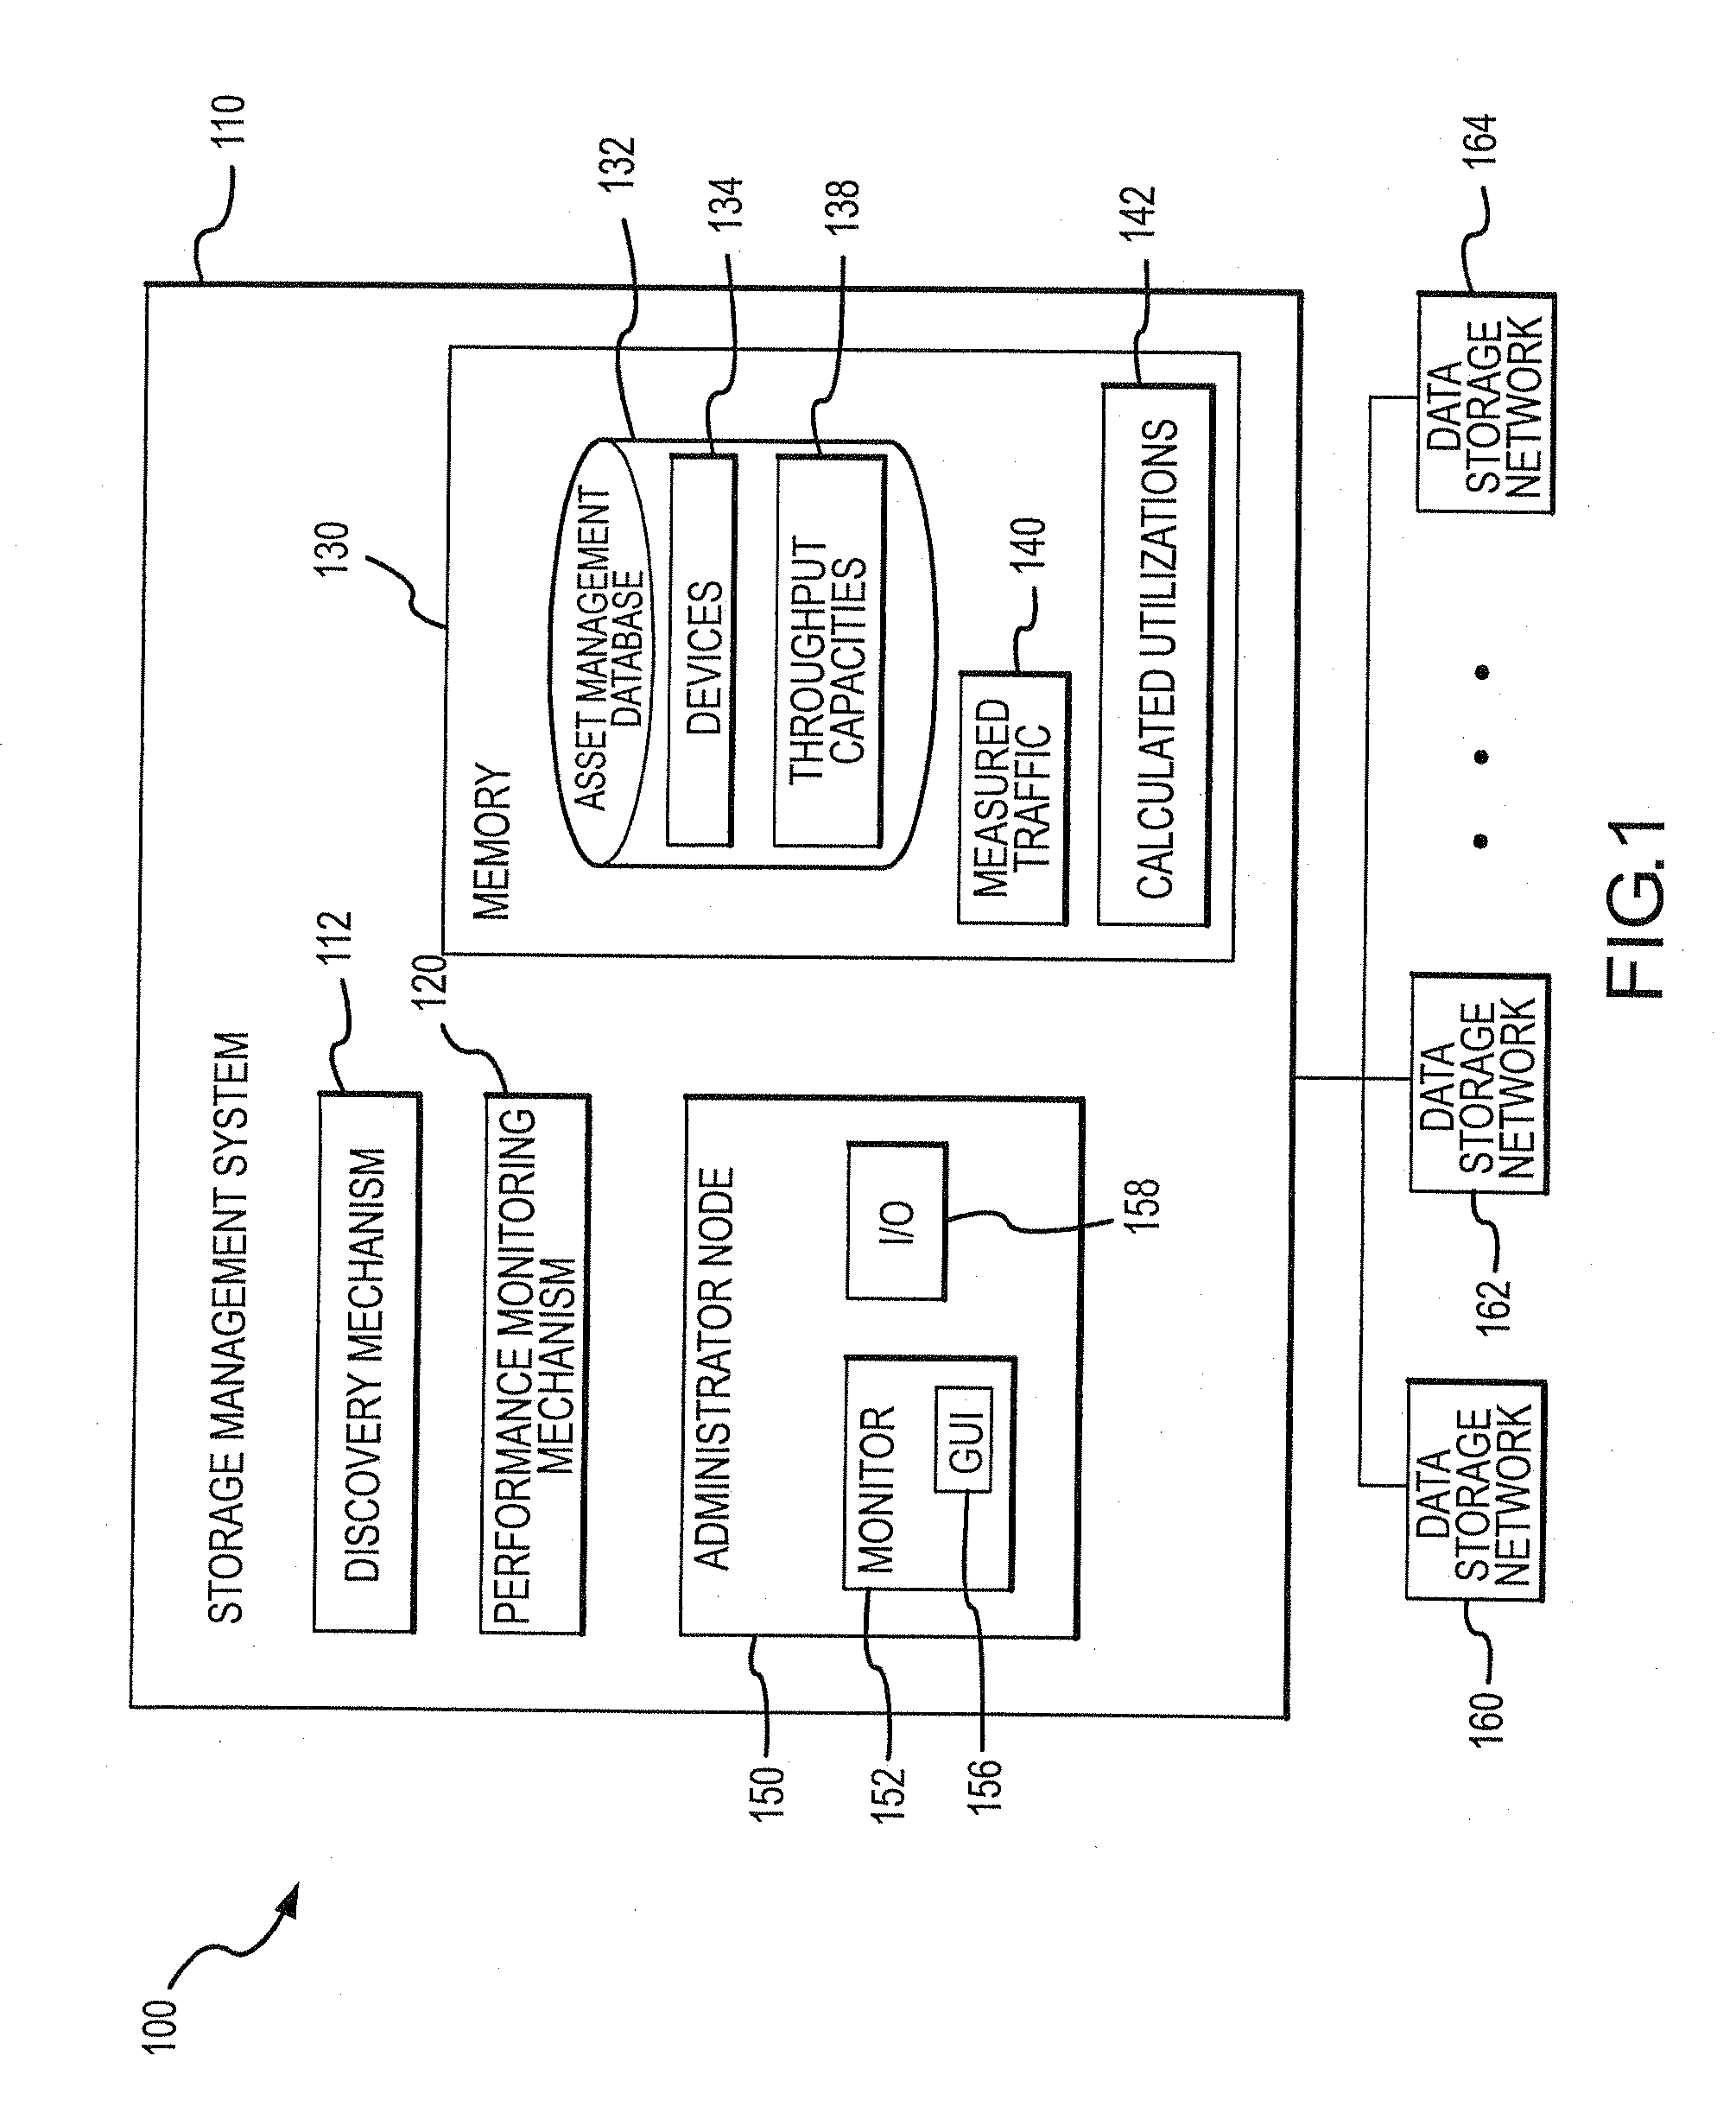 Method and System for Generating a Network Monitoring Display with Animated Utilization Information